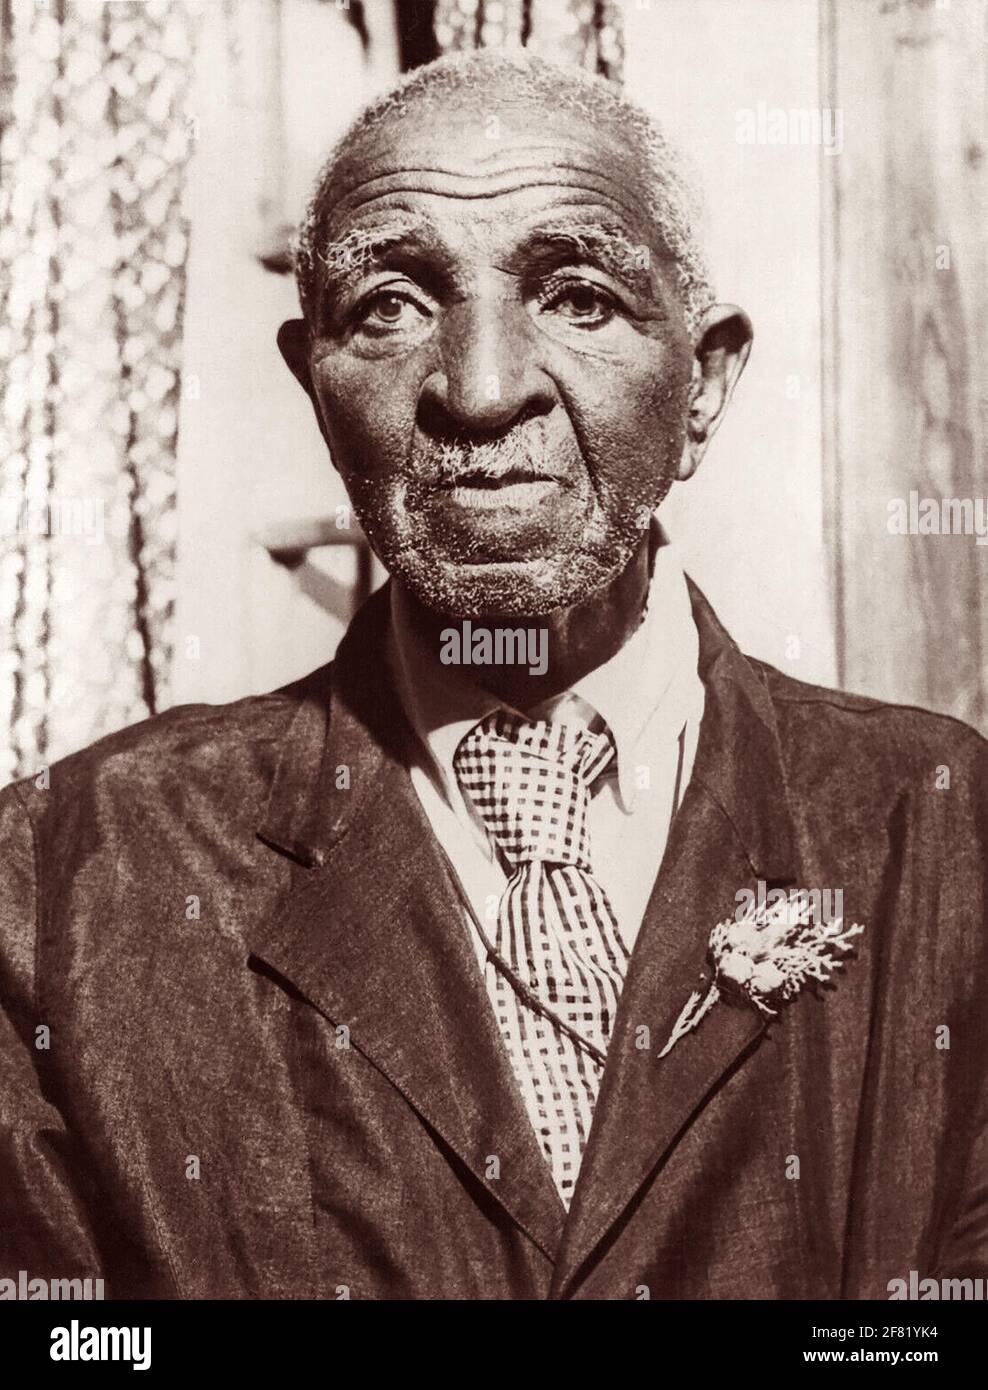 Portrait of George Washington Carver (c1864-1943) during Carver's visit on July 21, 1942, to the Ford Motor Company's George Washington Carver Nutrition Laboratory in Dearborn, Michigan. (USA) Stock Photo